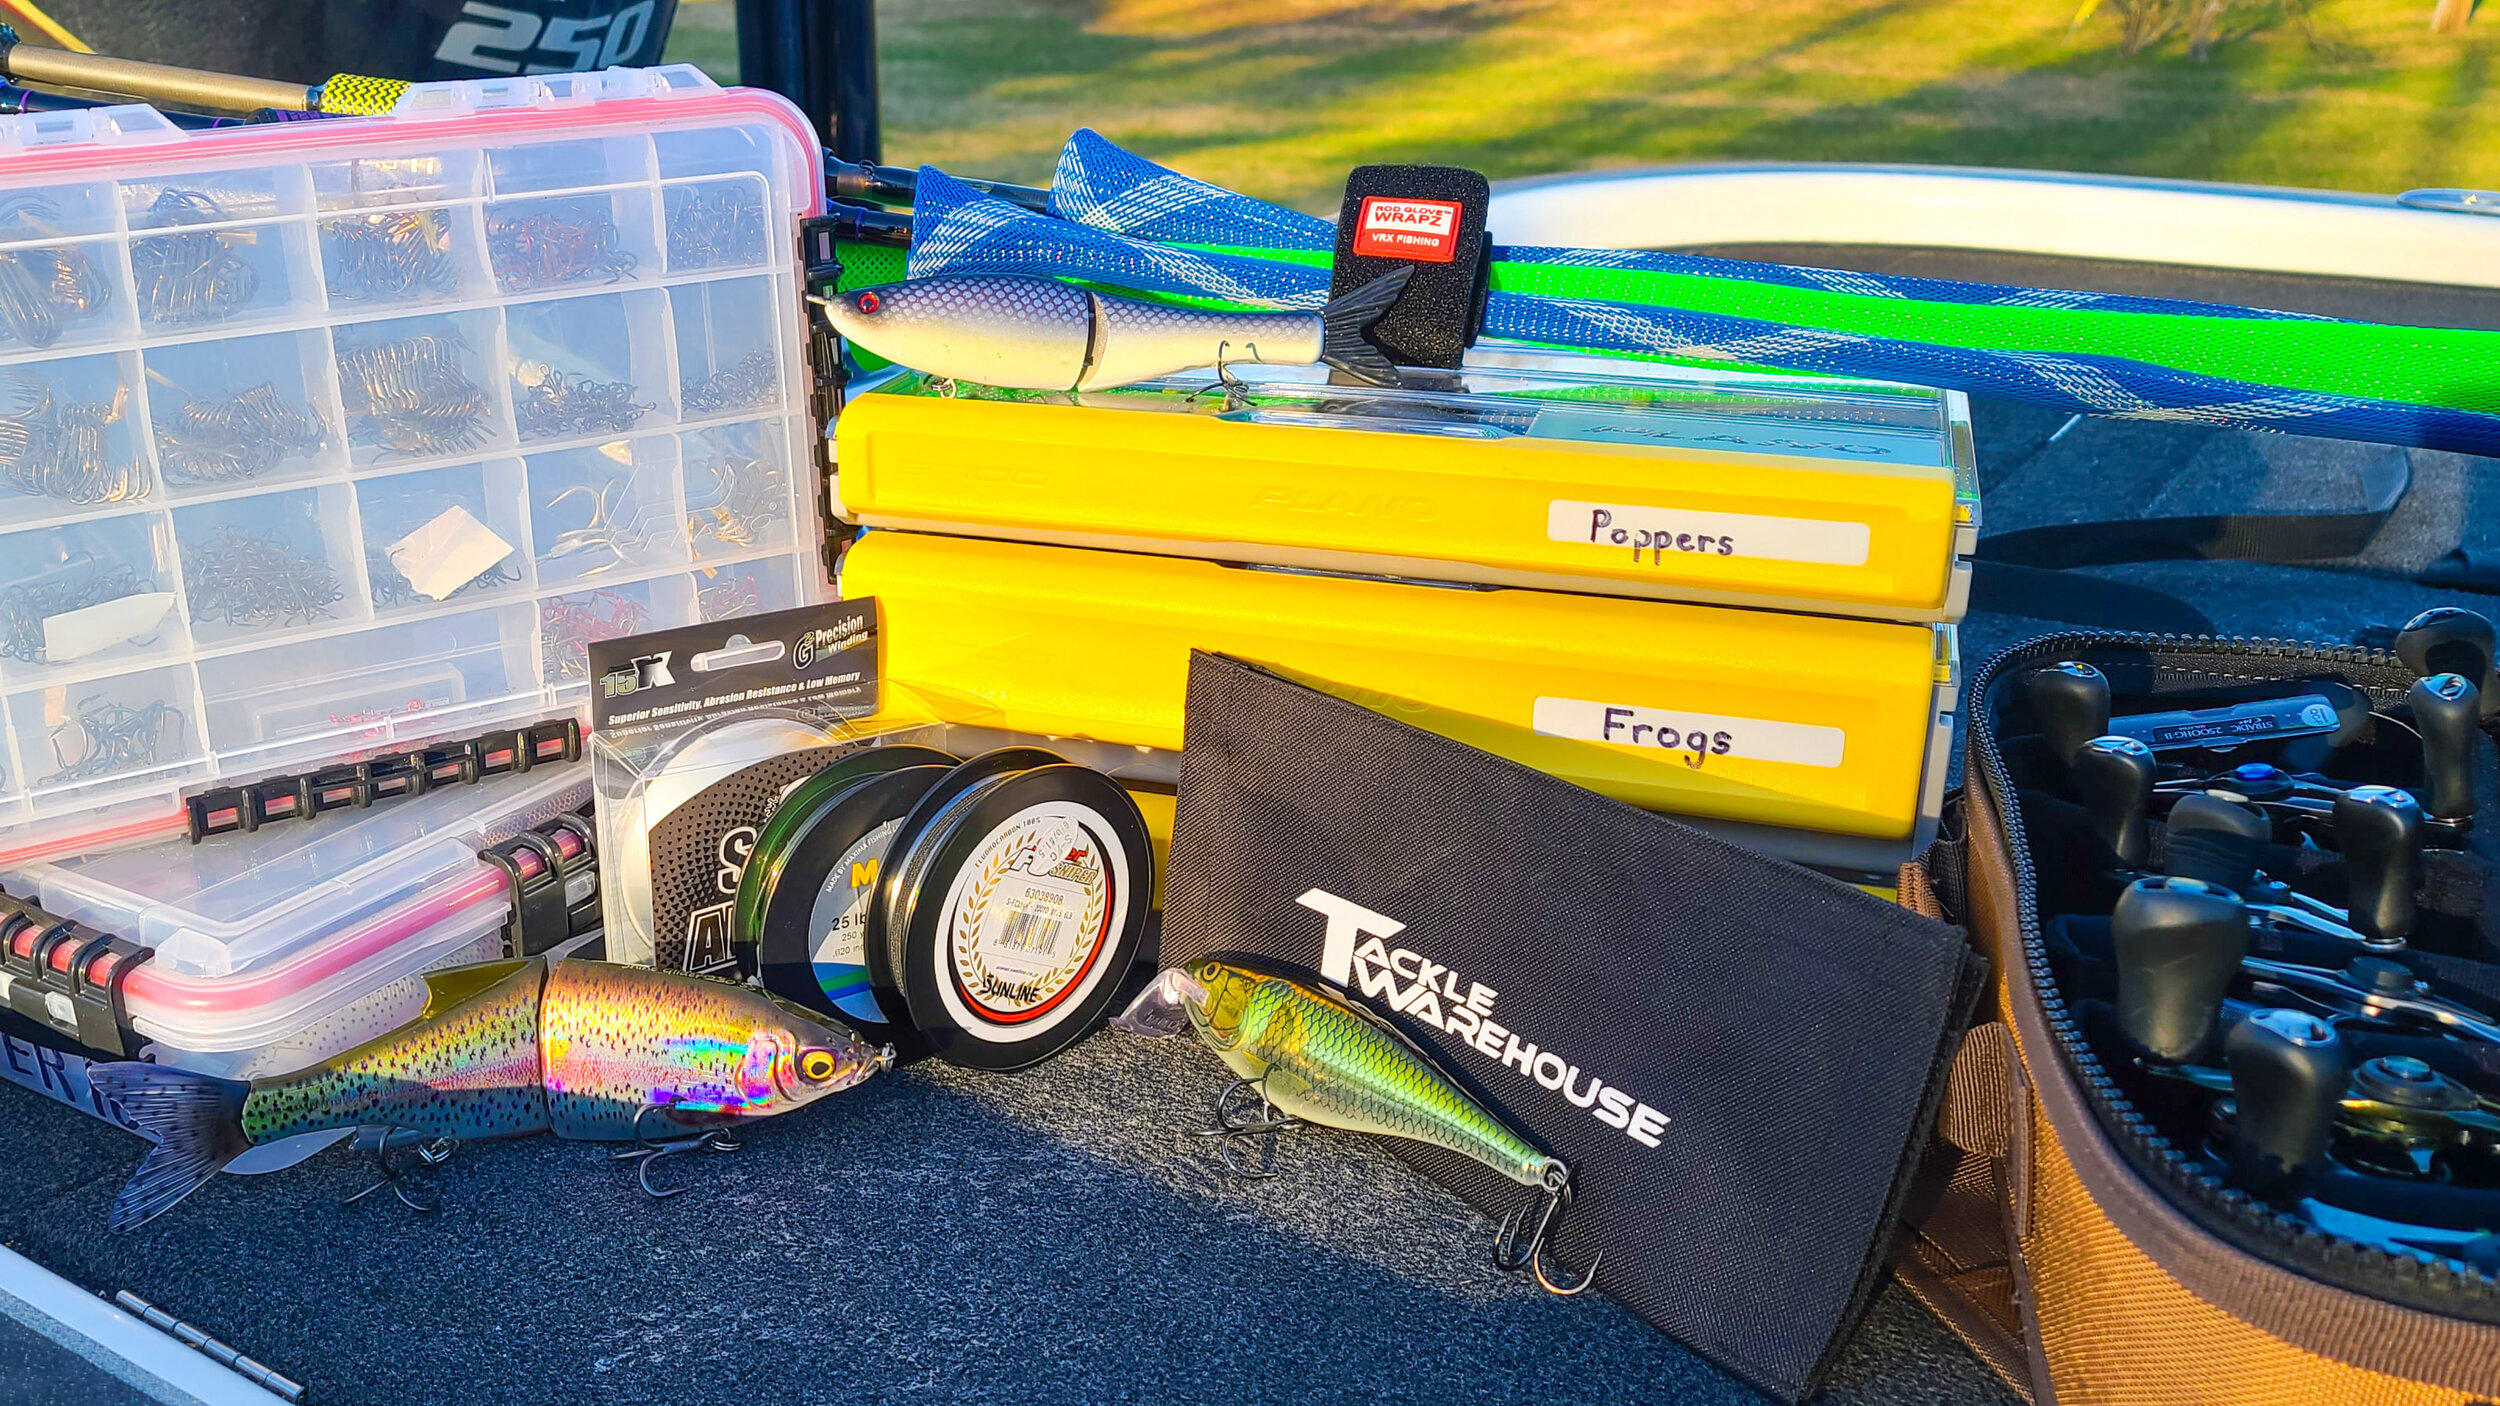 Buyer's Guide: Best Tackle Storage Solutions And Gear Protection